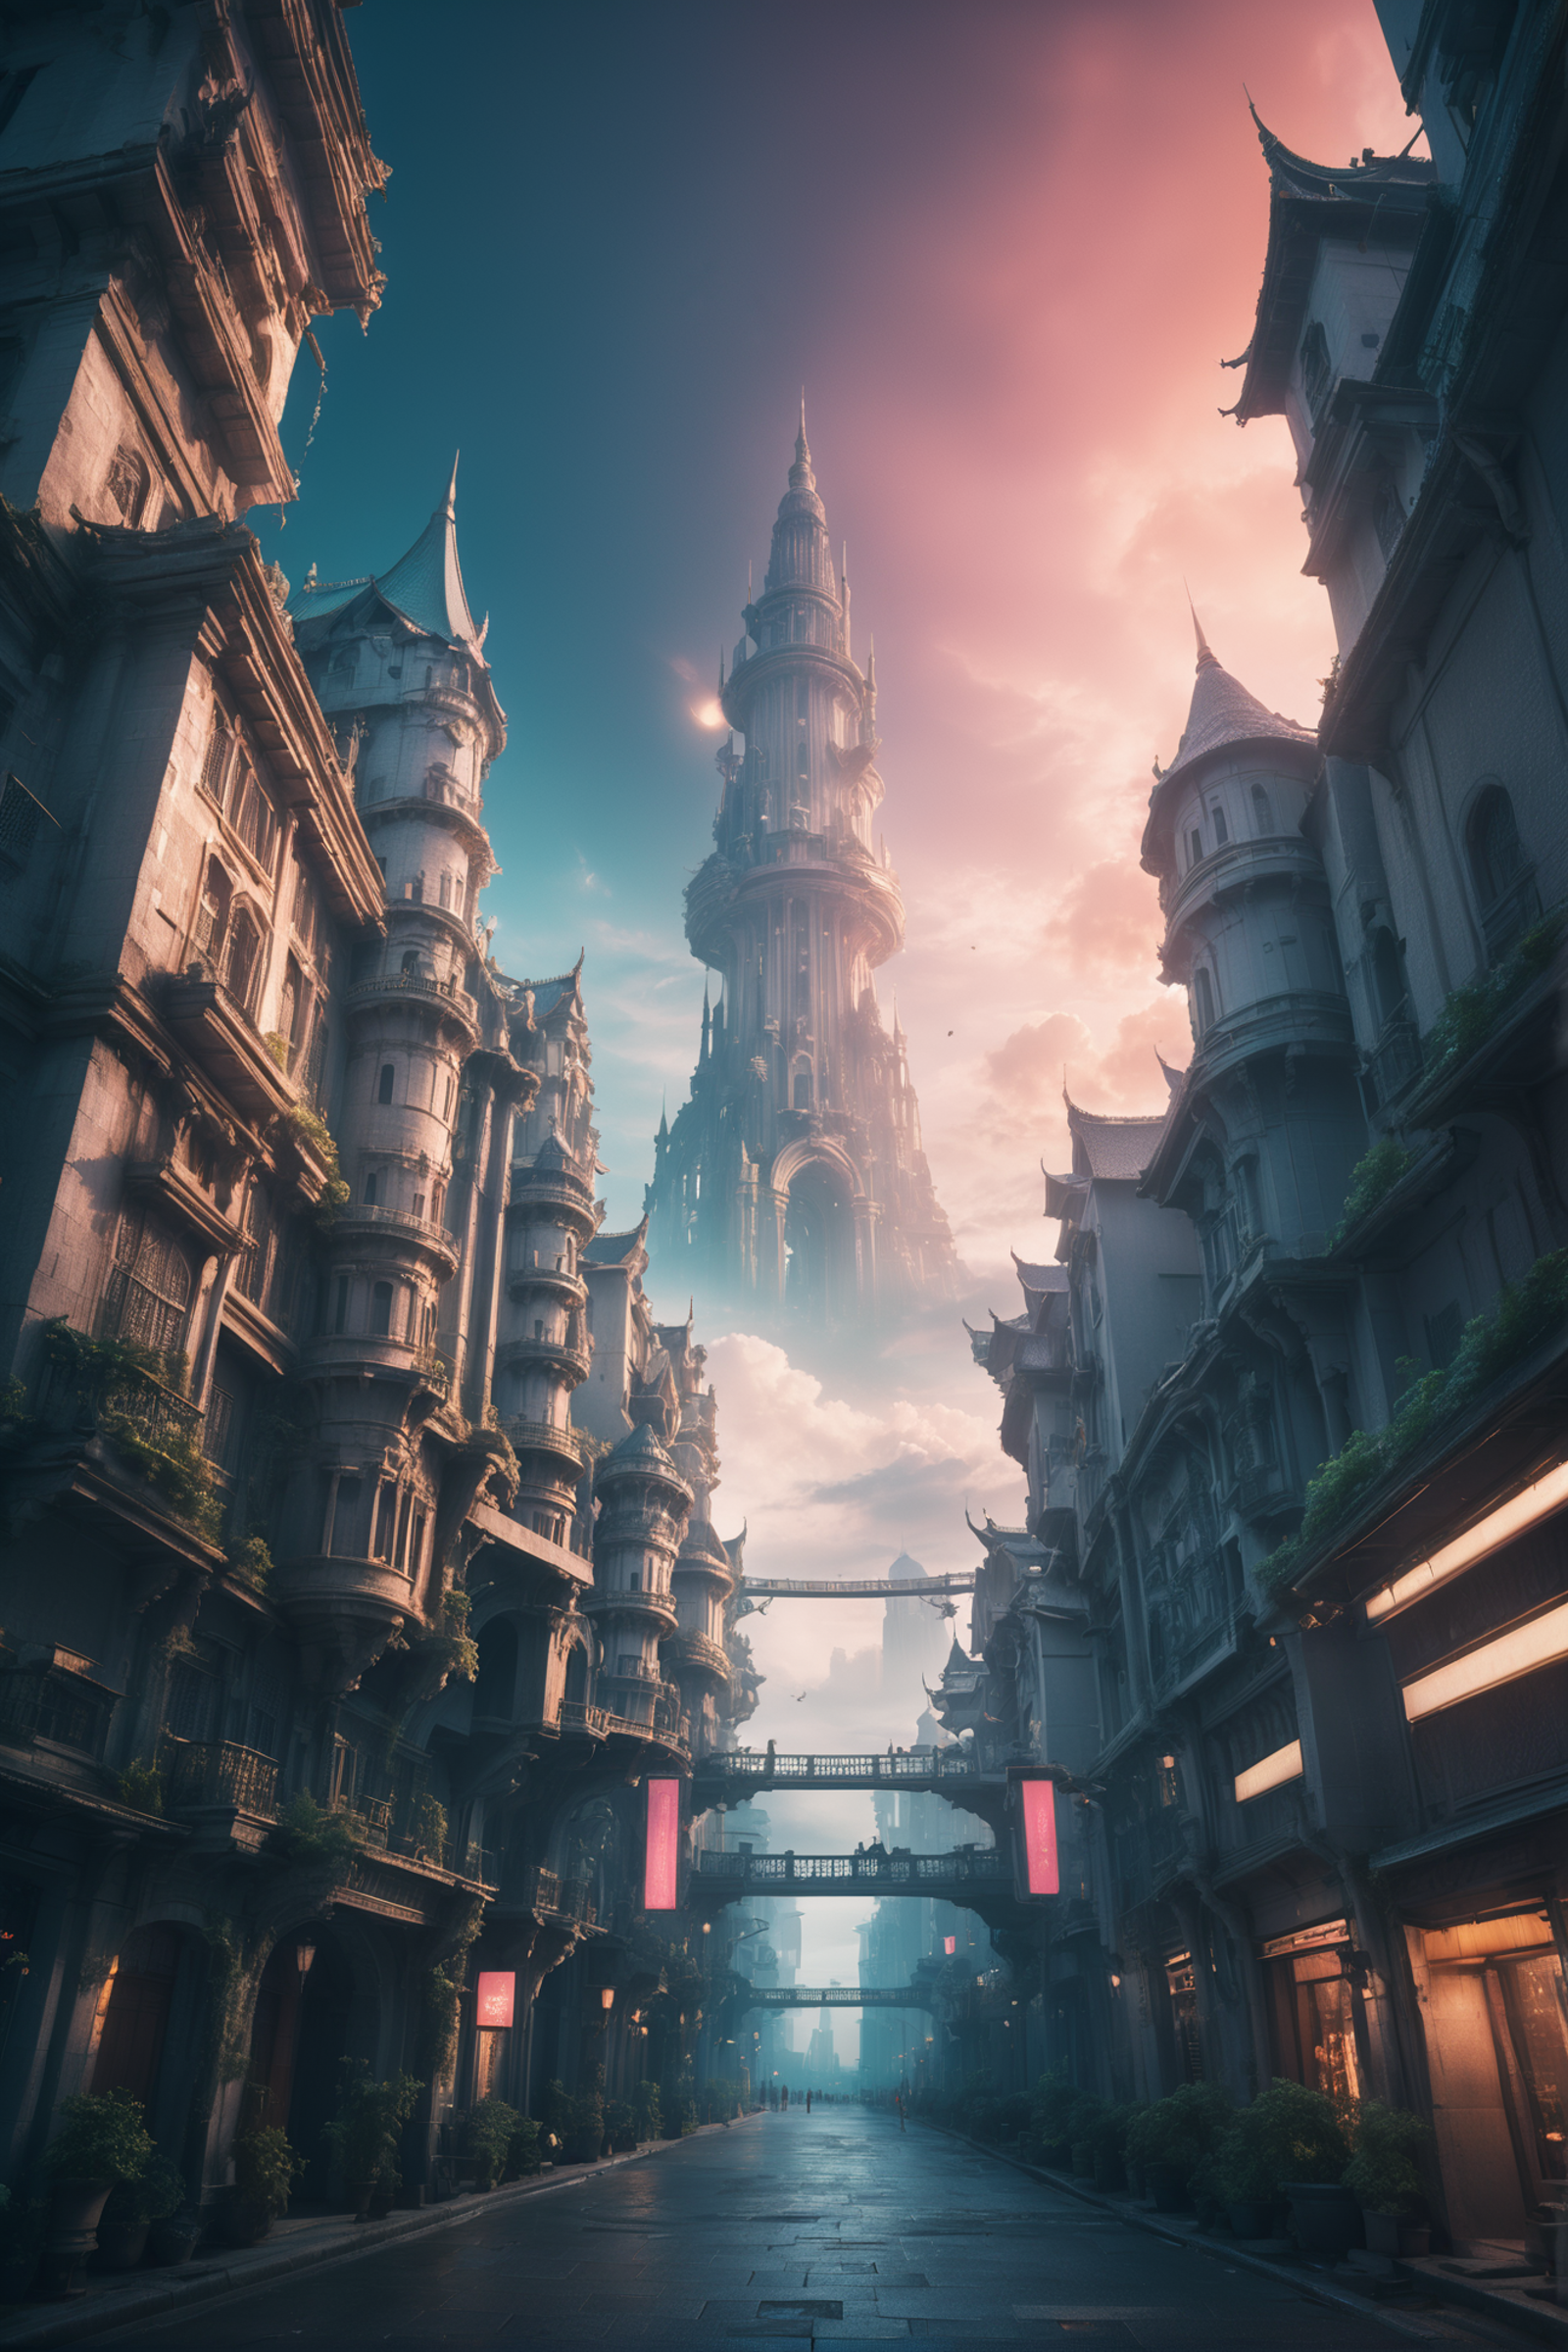 A fantastical cityscape with a large tower behind a bridge.